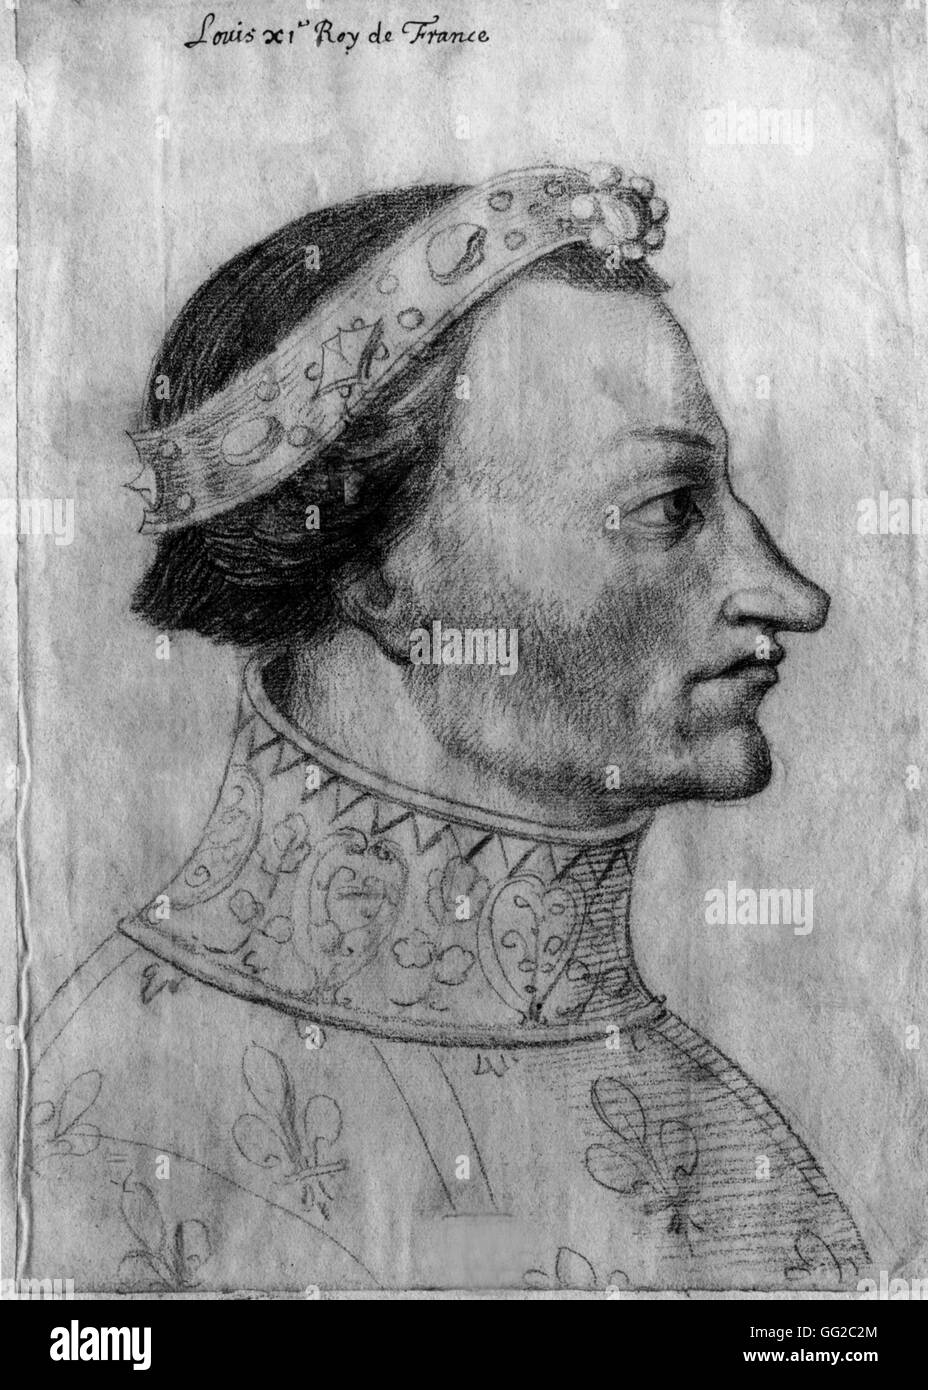 Louis XI, King of France 16th century France Stock Photo